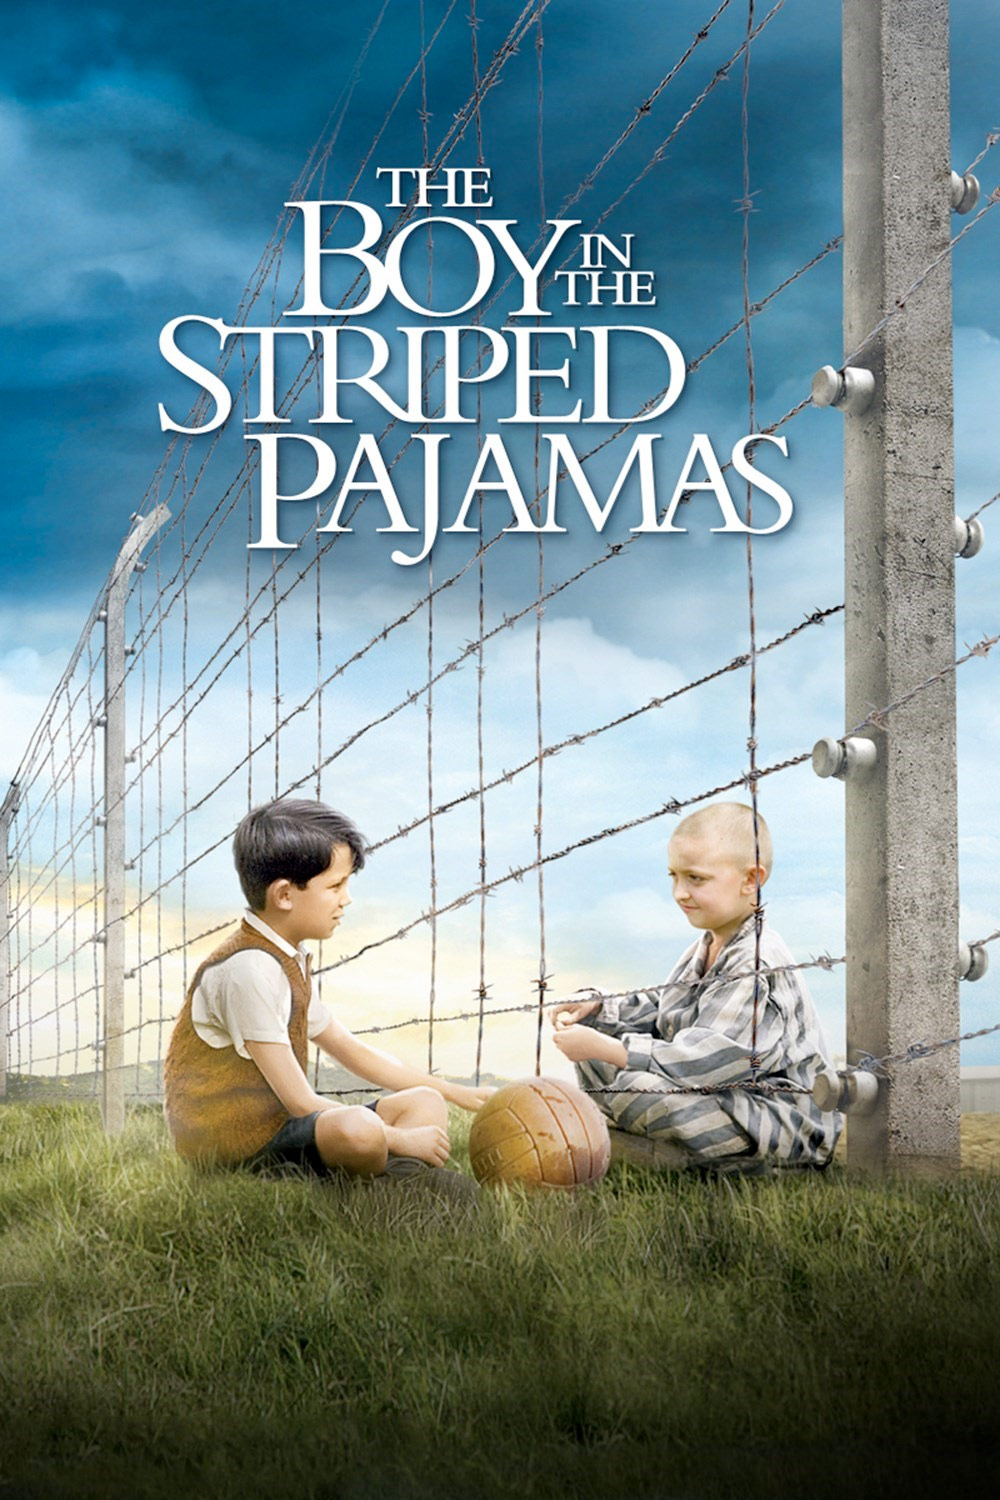 jurk Polijsten legering The Boy in the Striped Pajamas - Plugged In